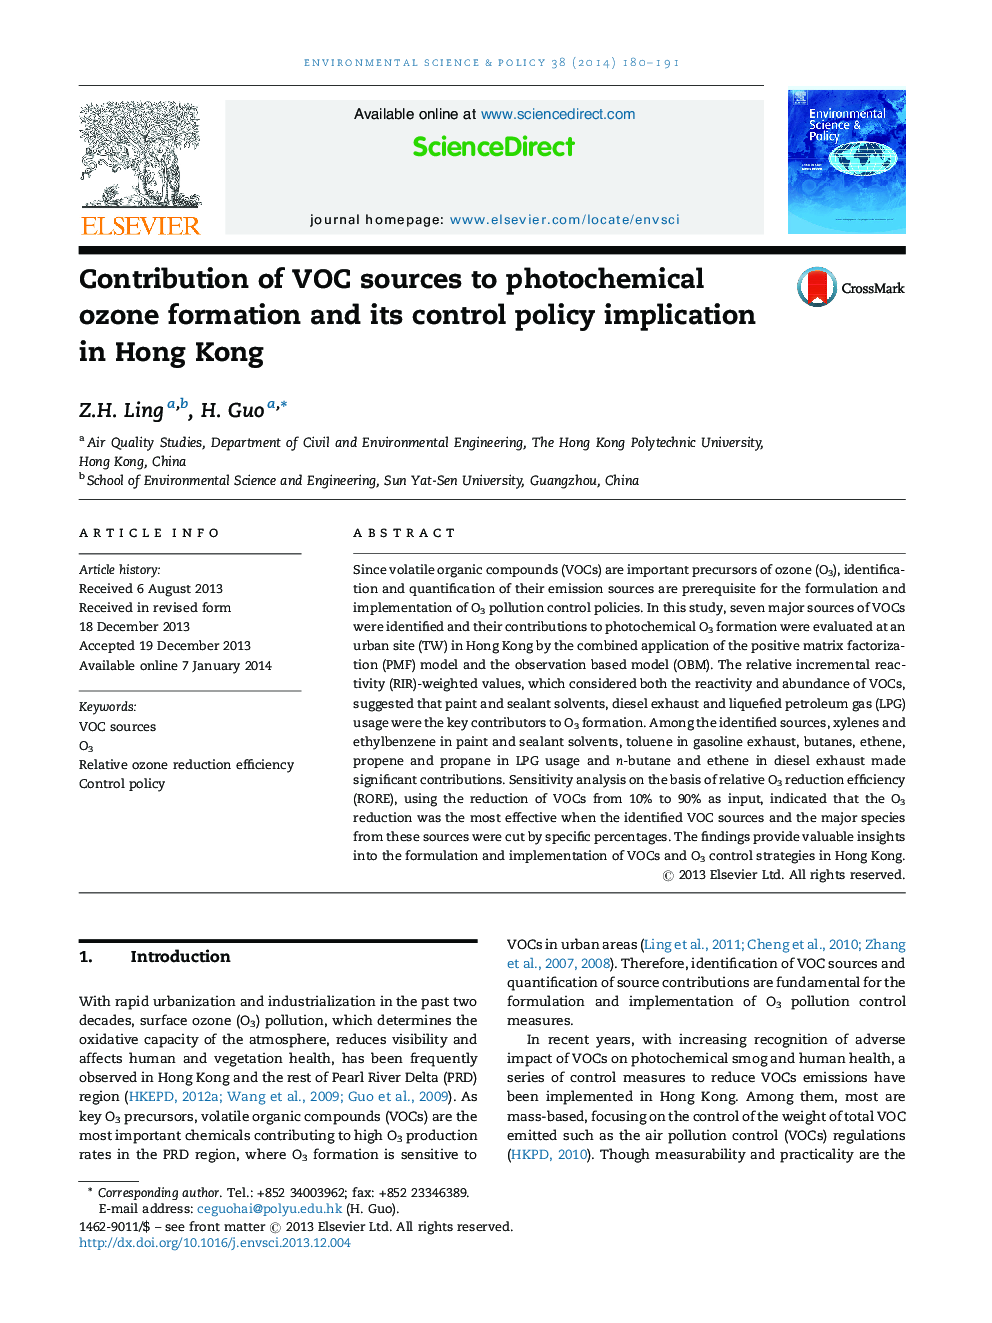 Contribution of VOC sources to photochemical ozone formation and its control policy implication in Hong Kong